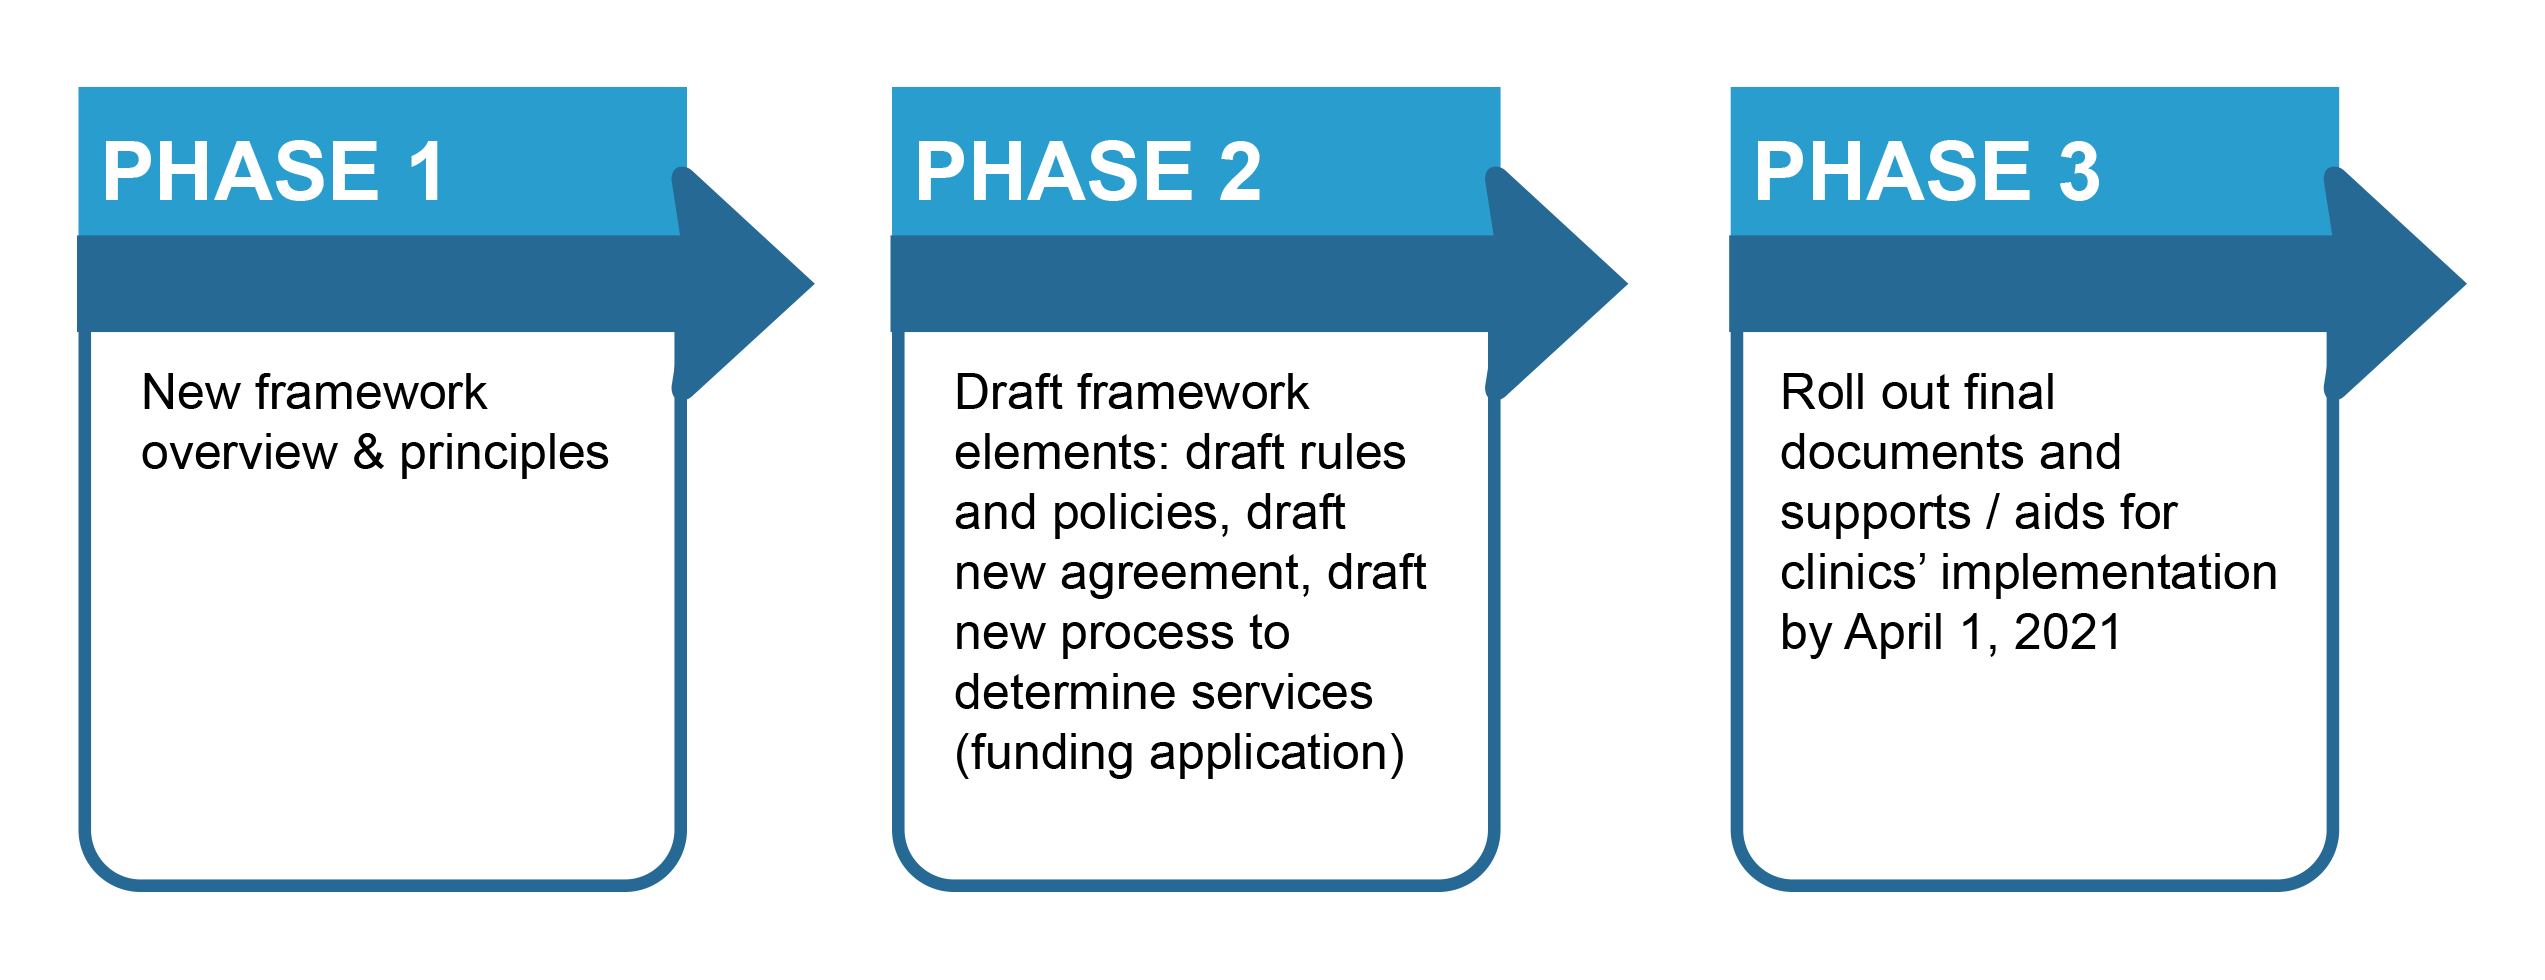 Graphic showing the three phases. Phase 1 is new framework overview & principles. Phase 2 is draft framework elements: draft rules and policies, draft new agreement, draft new process to determine services (funding application). Phase 3 is roll out final documents and supports/aids for clinics' implementation by April 1, 2021.